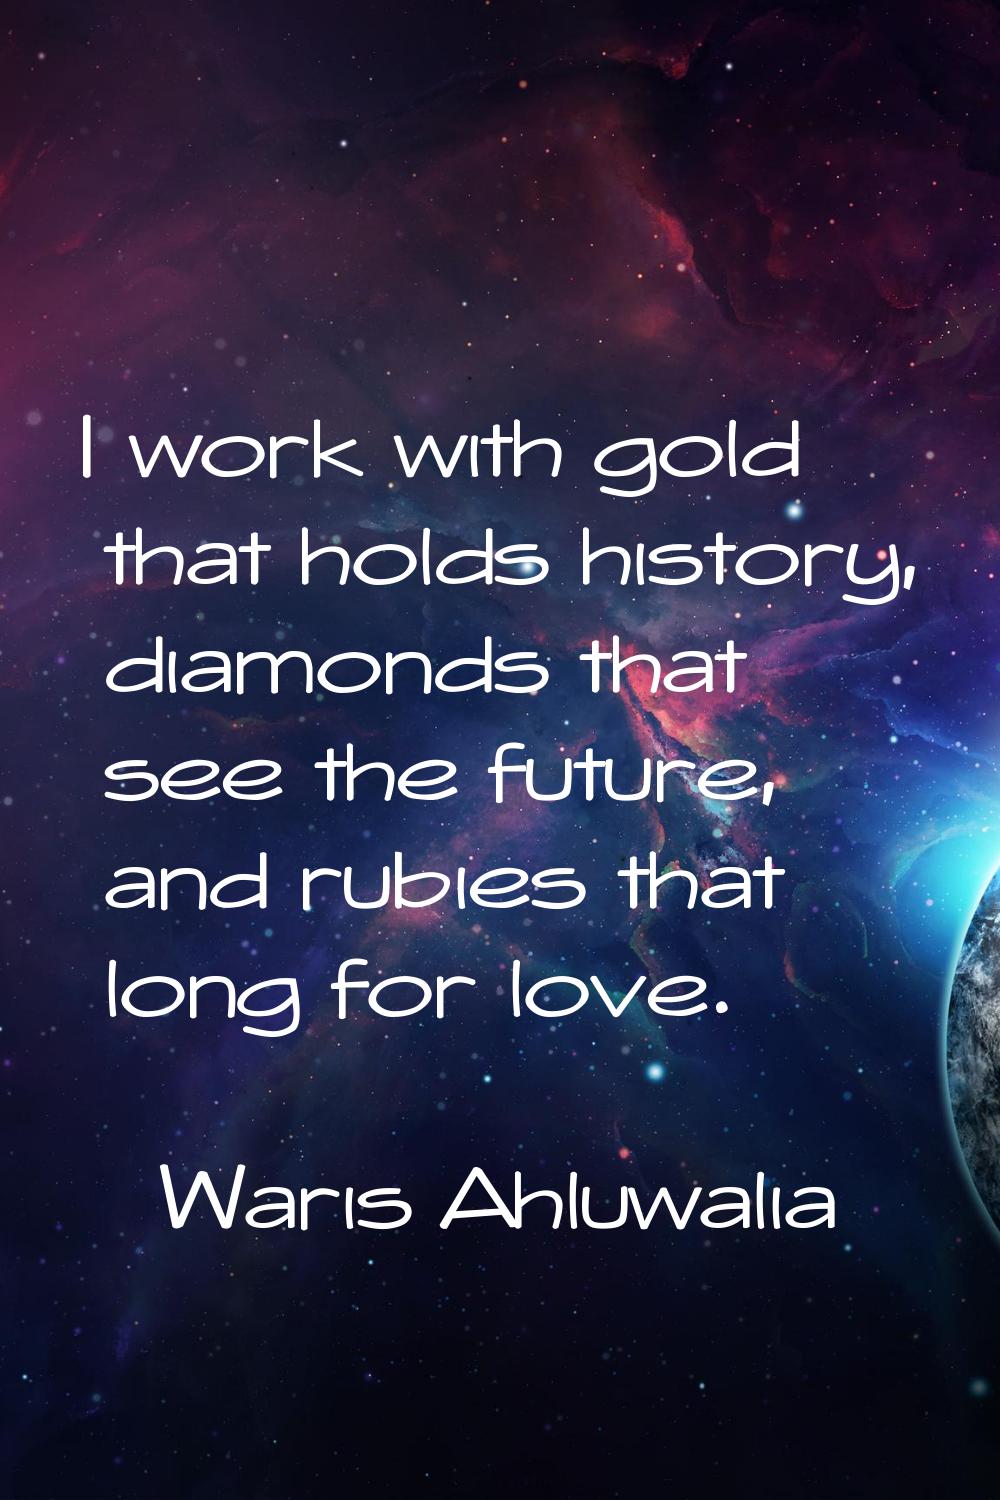 I work with gold that holds history, diamonds that see the future, and rubies that long for love.